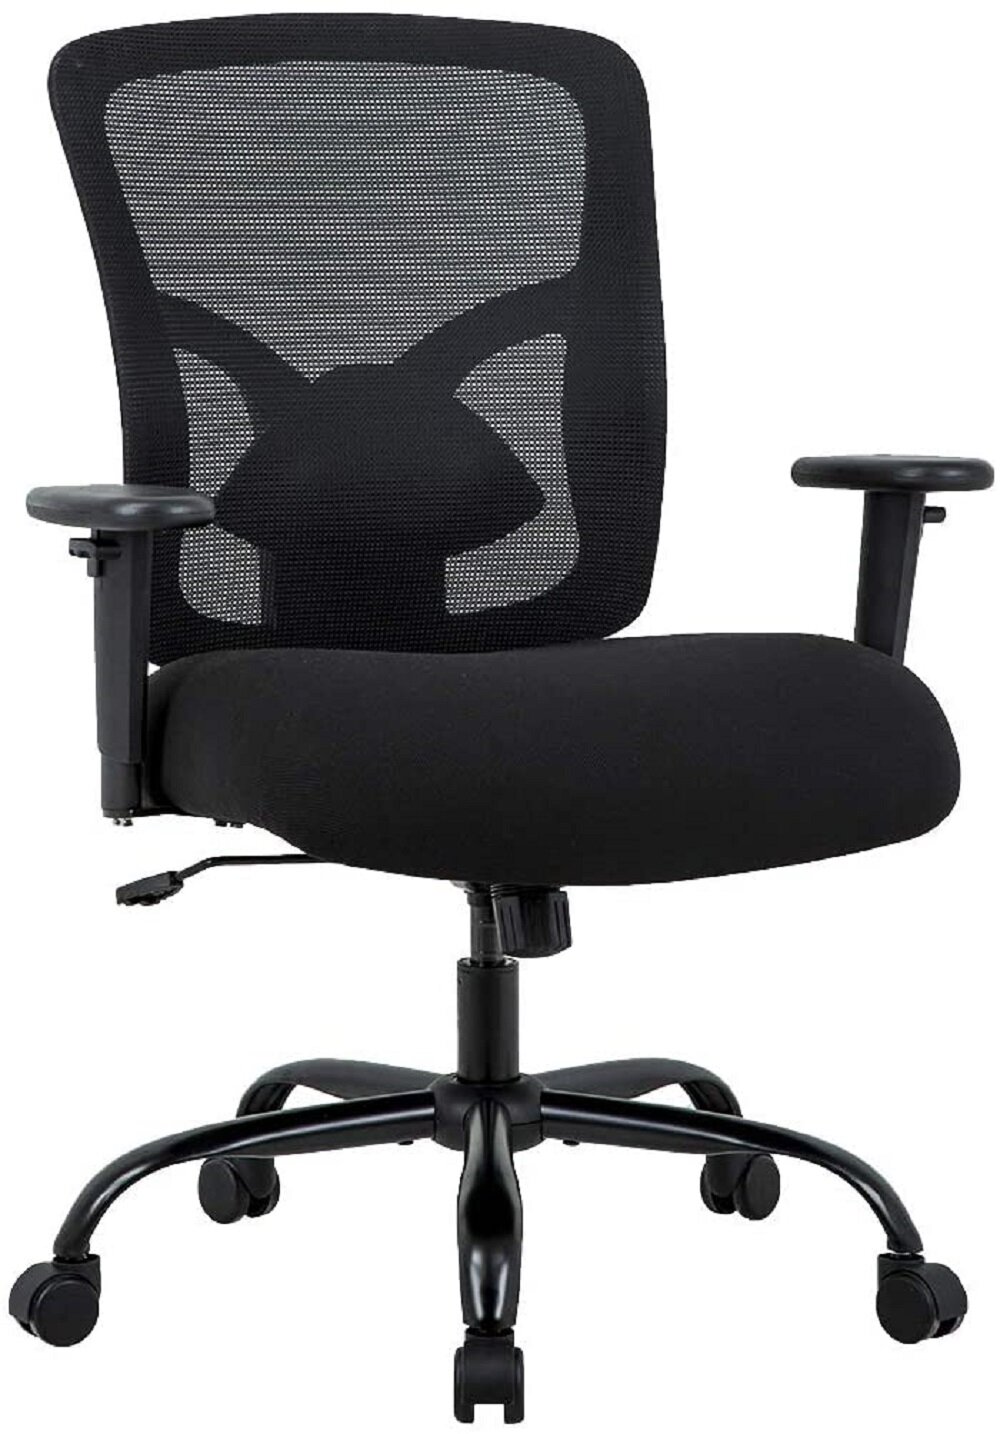 Inbox Zero Big And Tall Office Chair 400lbs Desk Chair Mesh Computer Chair With Lumbar Support Wide Seat Adjust Arms Rolling Swivel High Back Task Executive Ergonomic Chair For Women Men Black